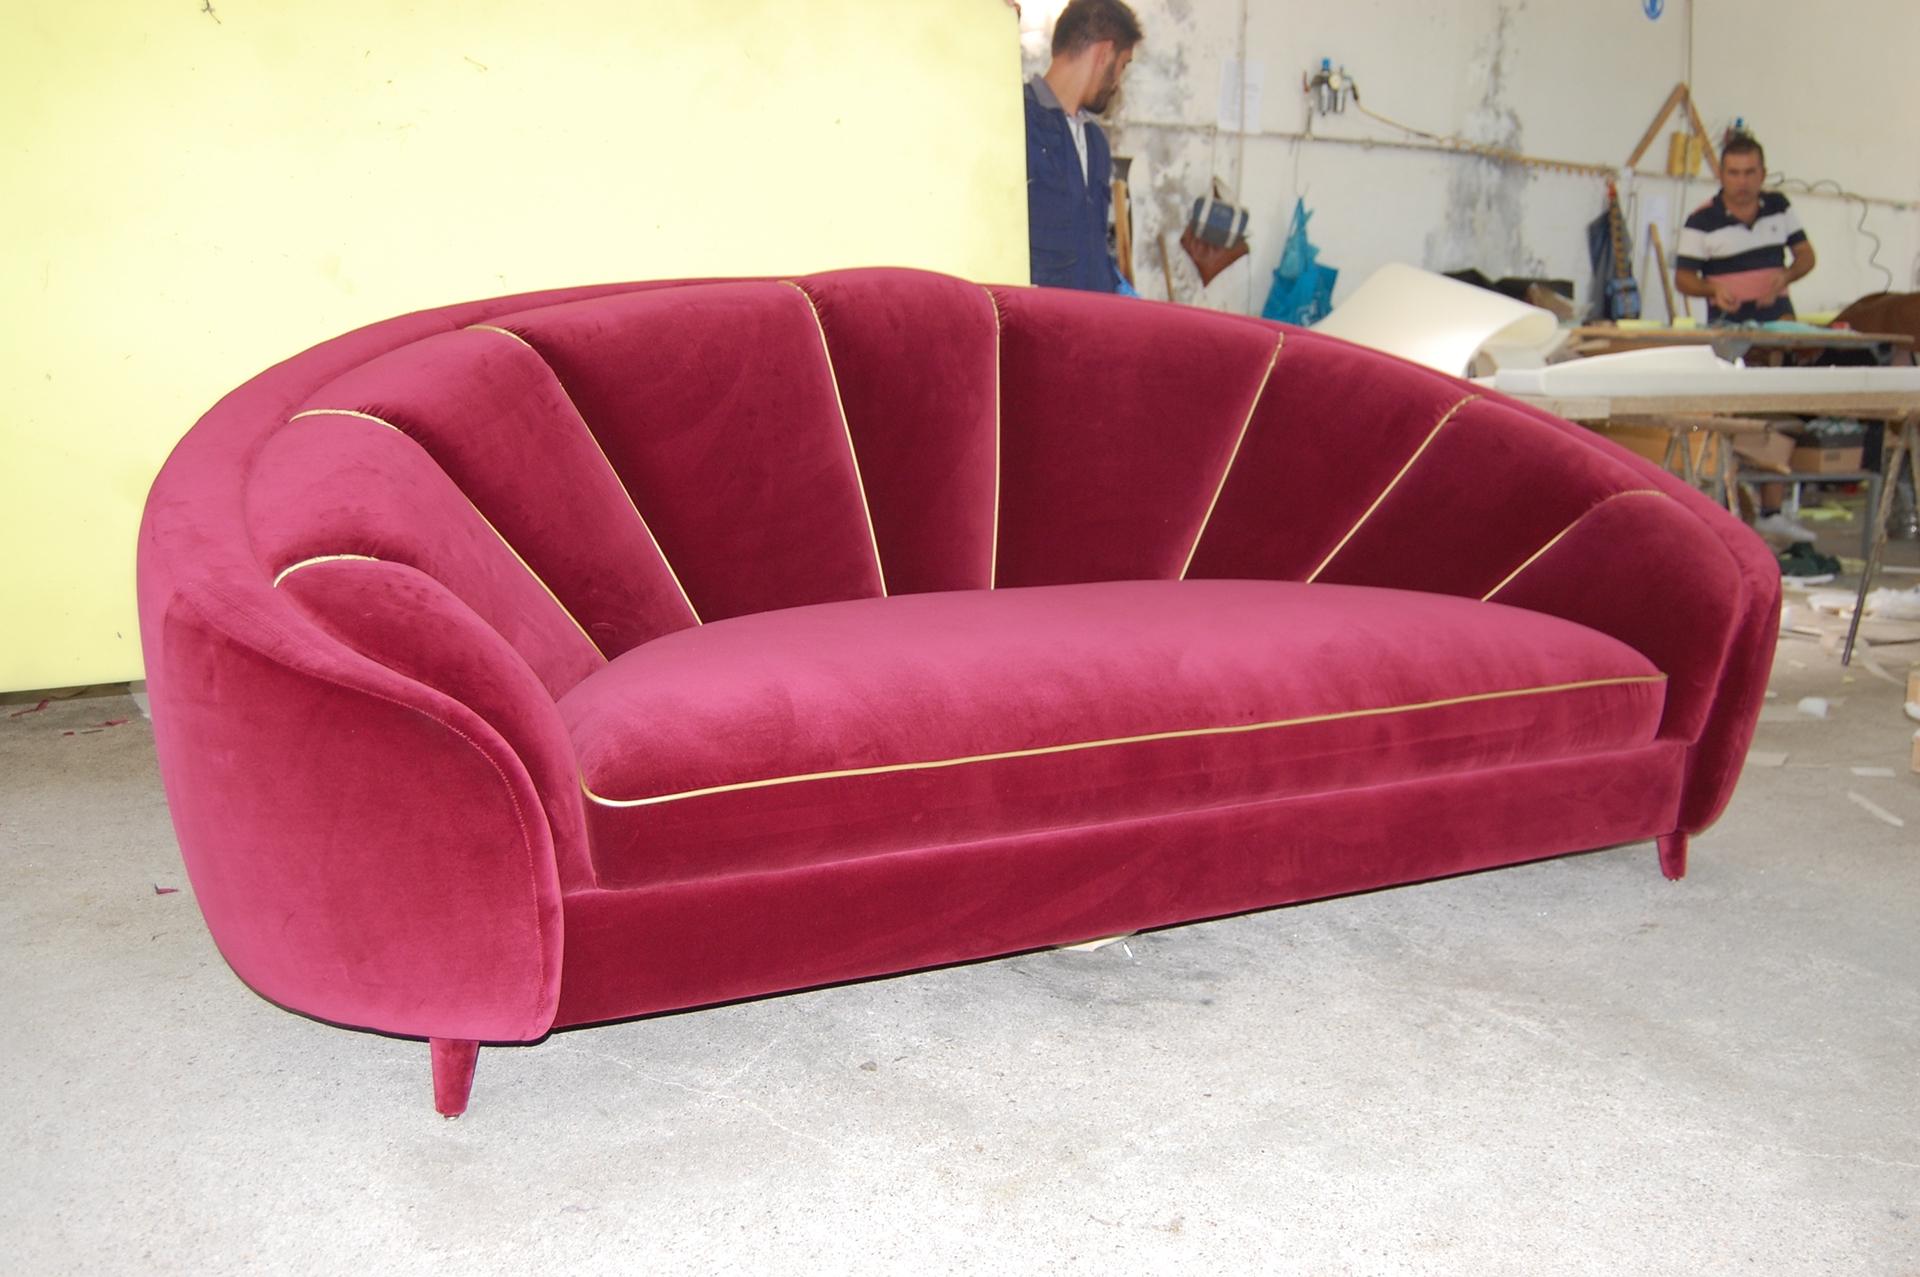 Modern Art Deco Style Sofa With Curved Silhouette For Sale